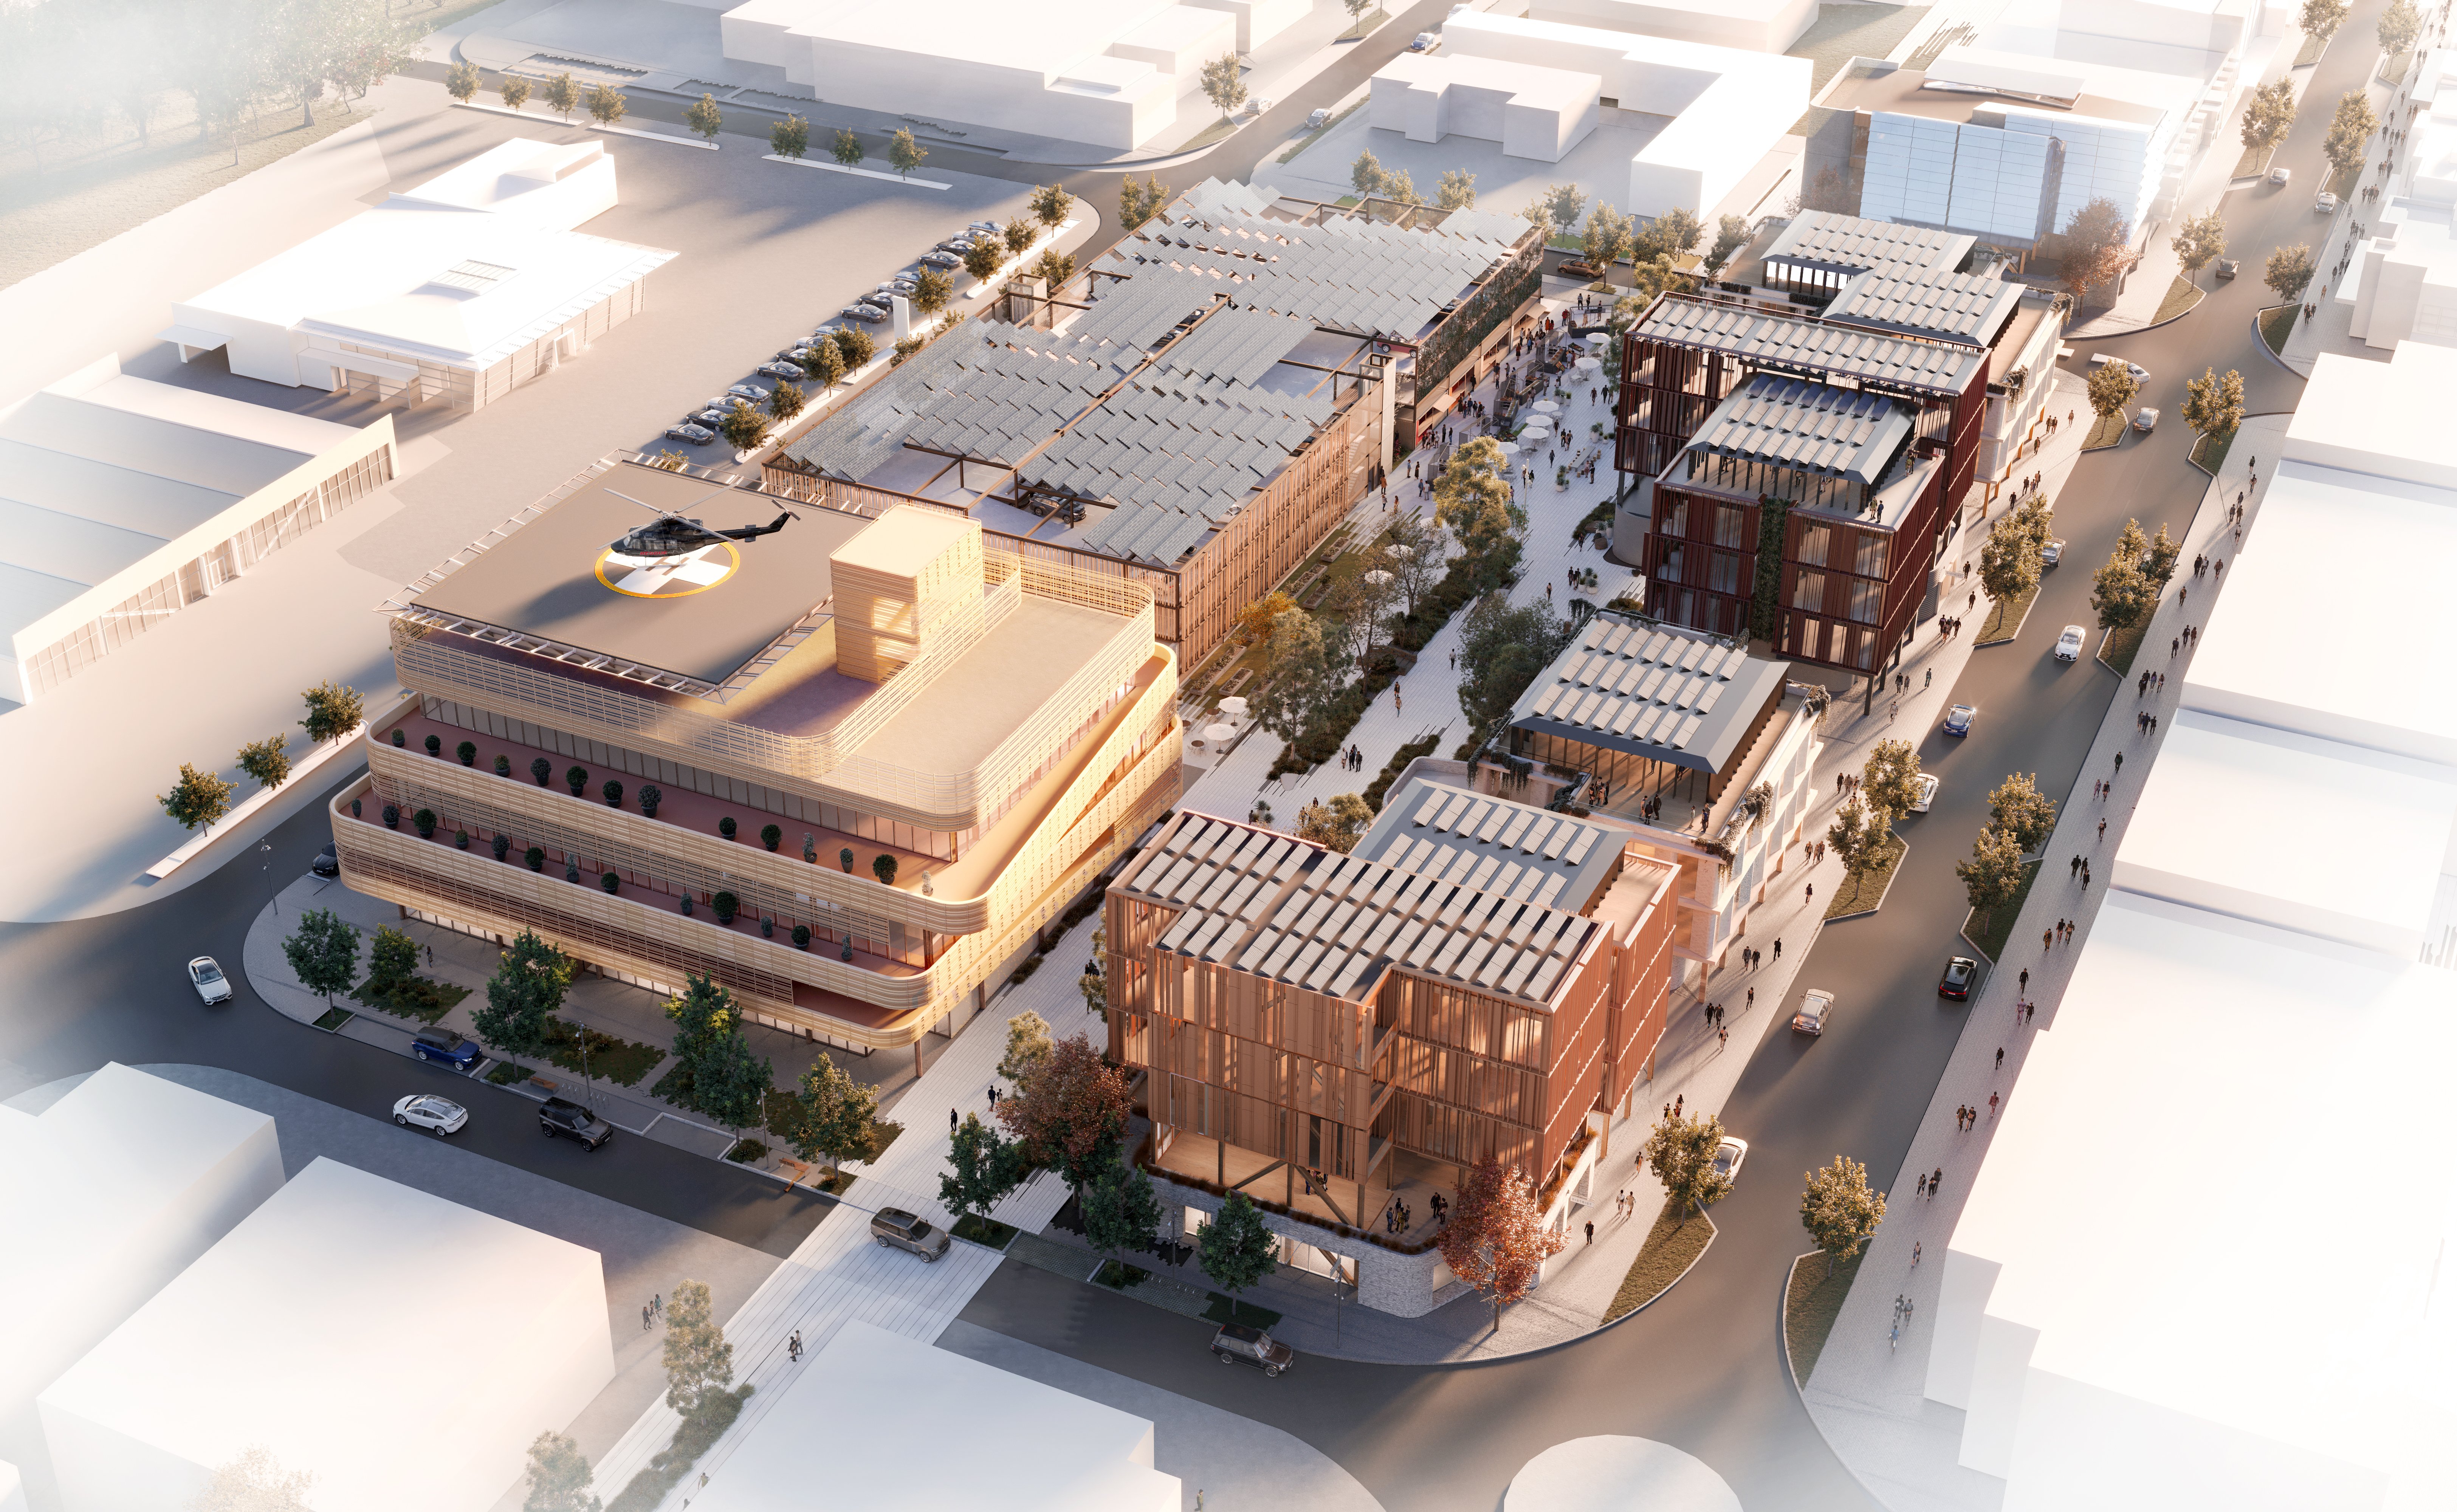 An overview of the planned health precinct. Image: Roa